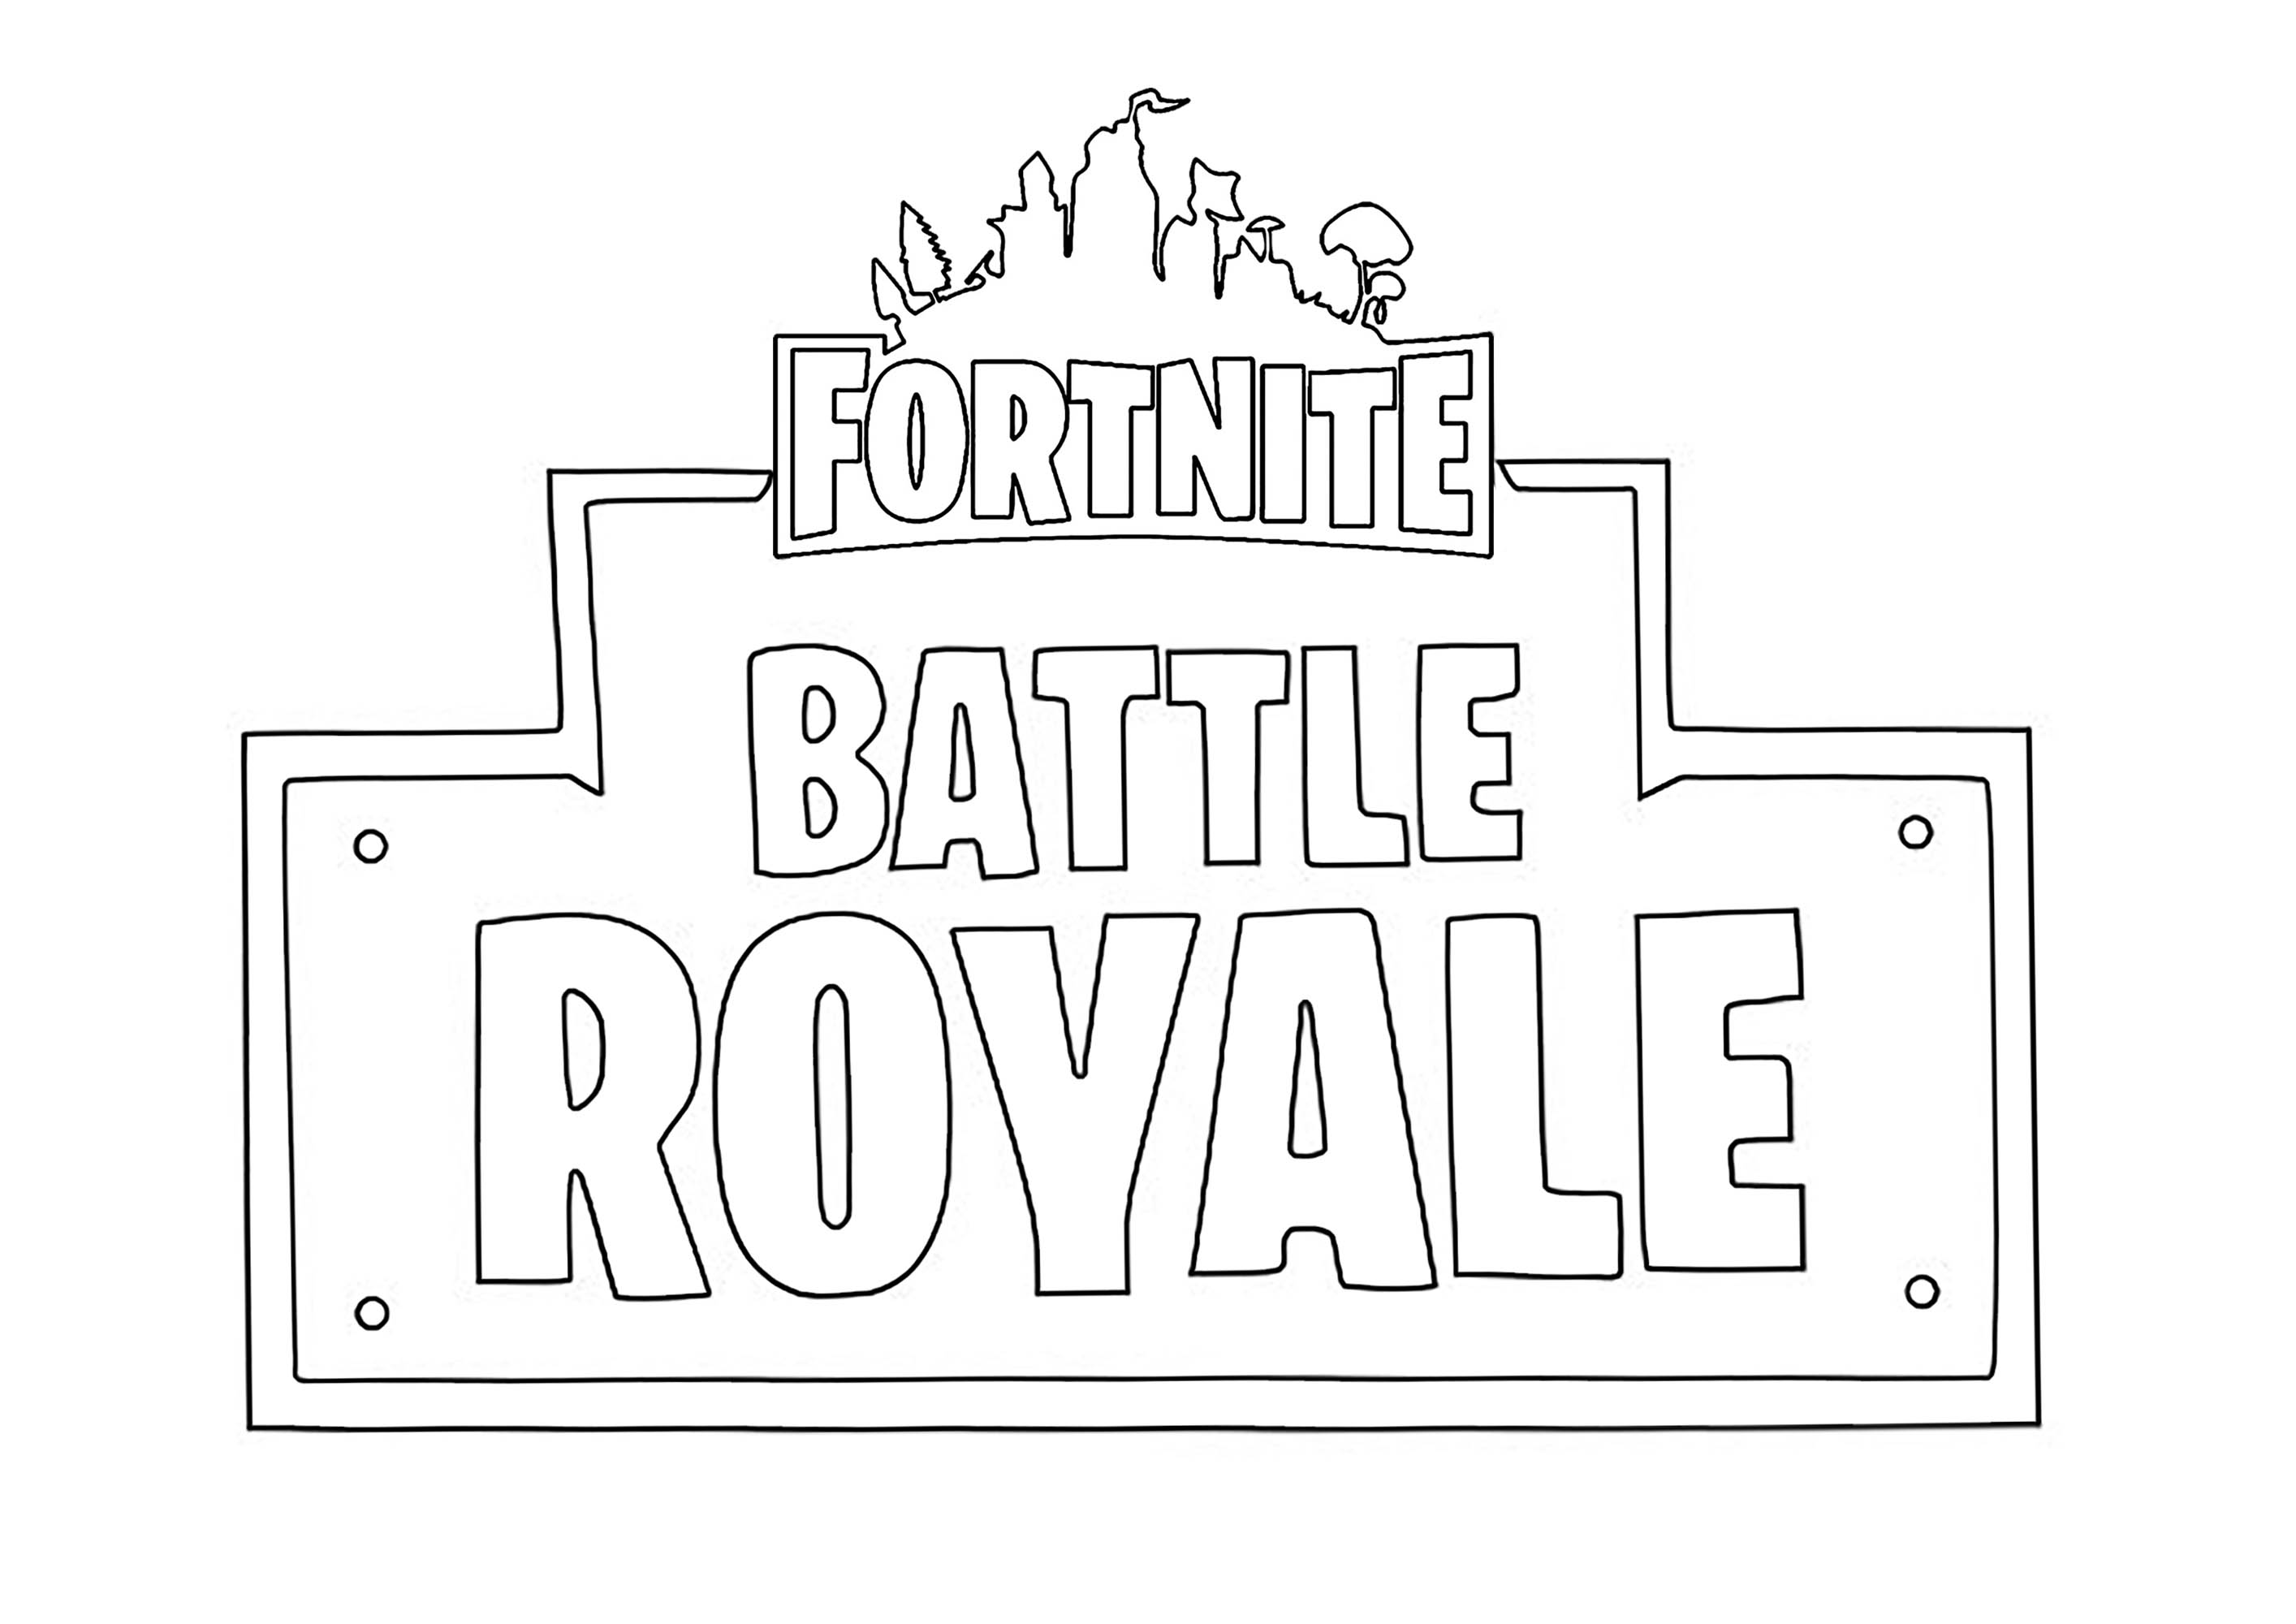 logo of this incredible game in black and white to print and color - fortnite black banner color